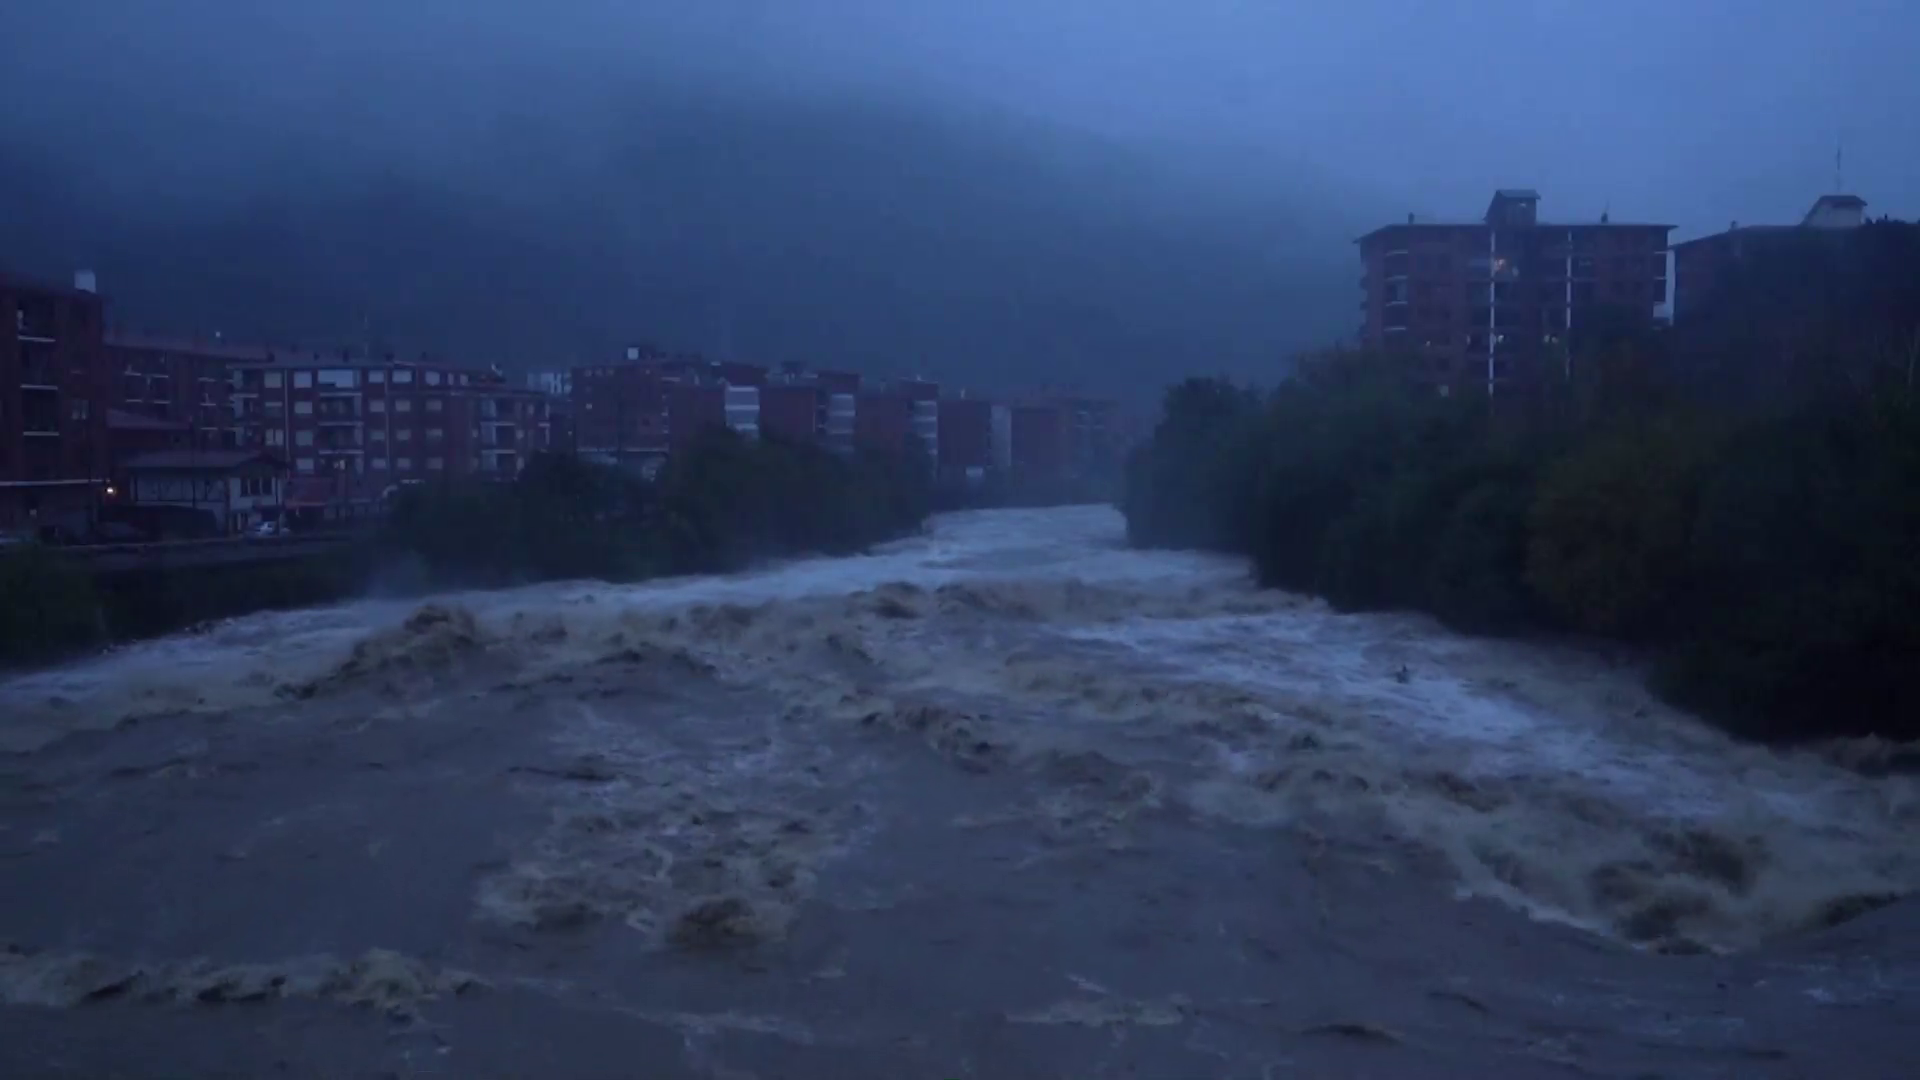 Rivers in northern Spain burst banks after heavy rain and snow melt